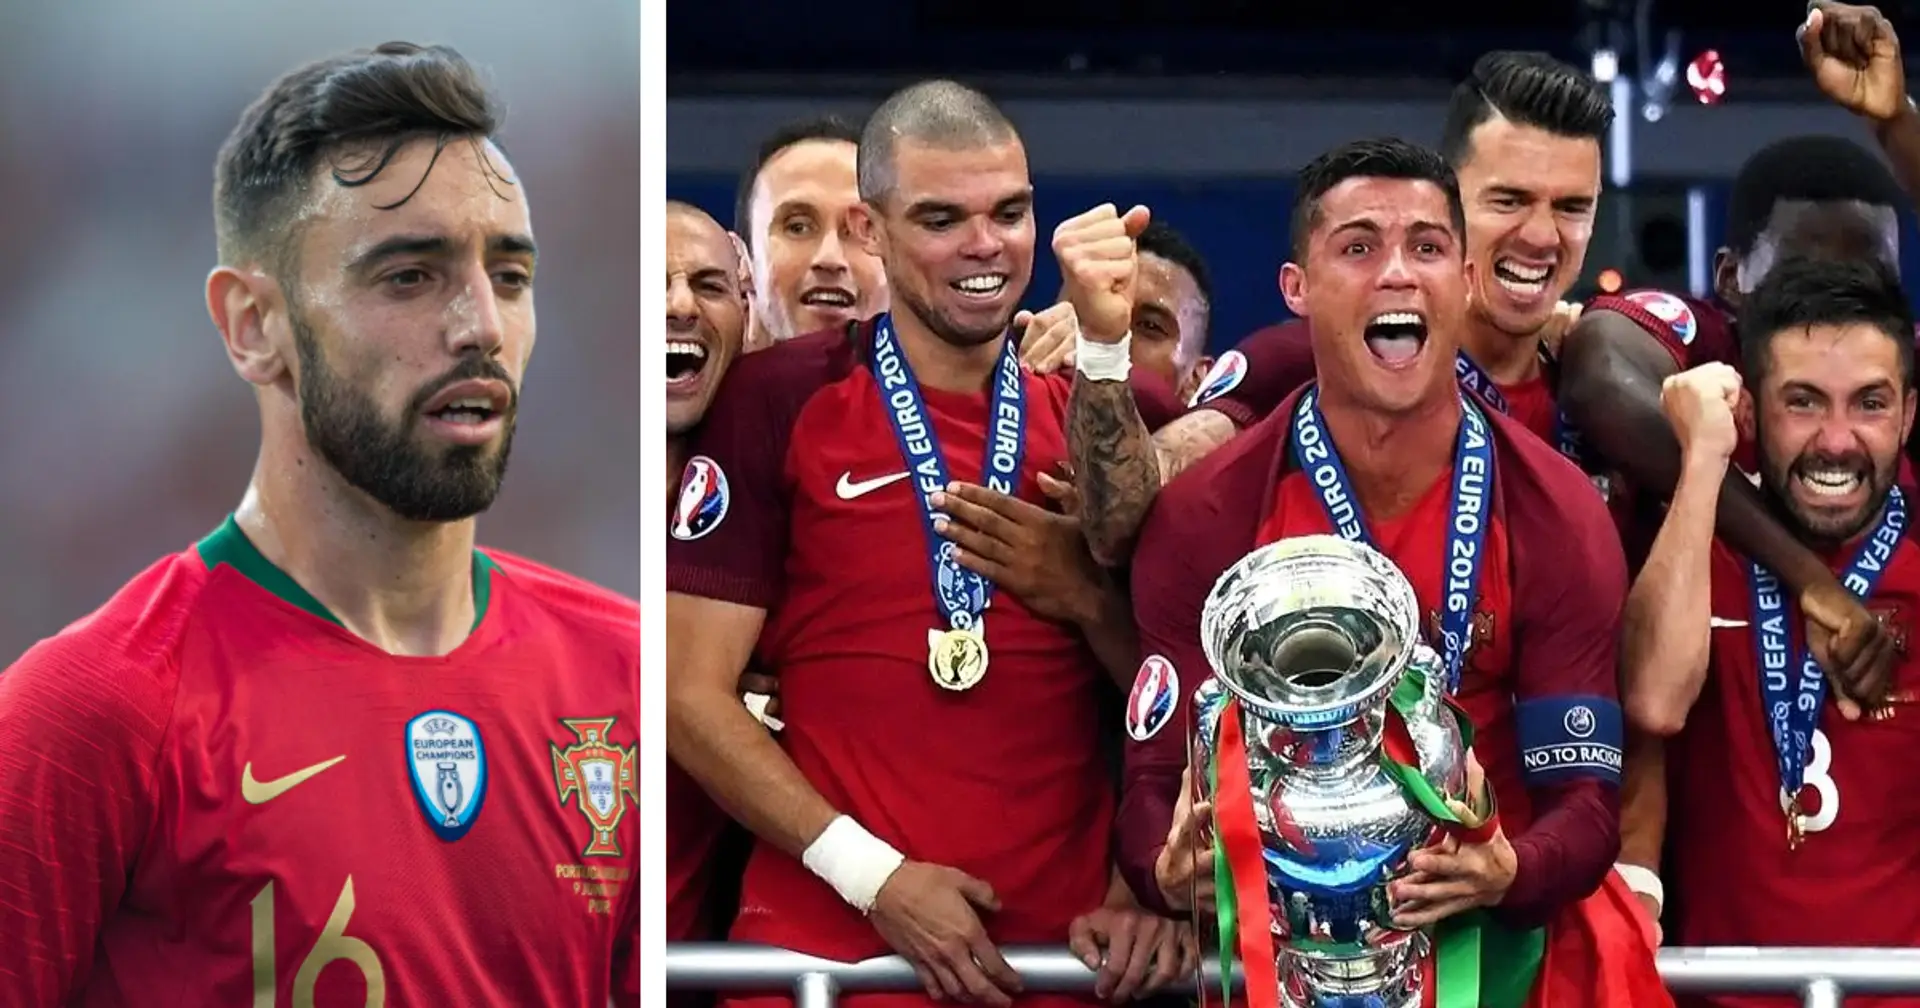 Bruno Fernandes reveals why he 'suffered alone' during Portugal's Euro win in 2016